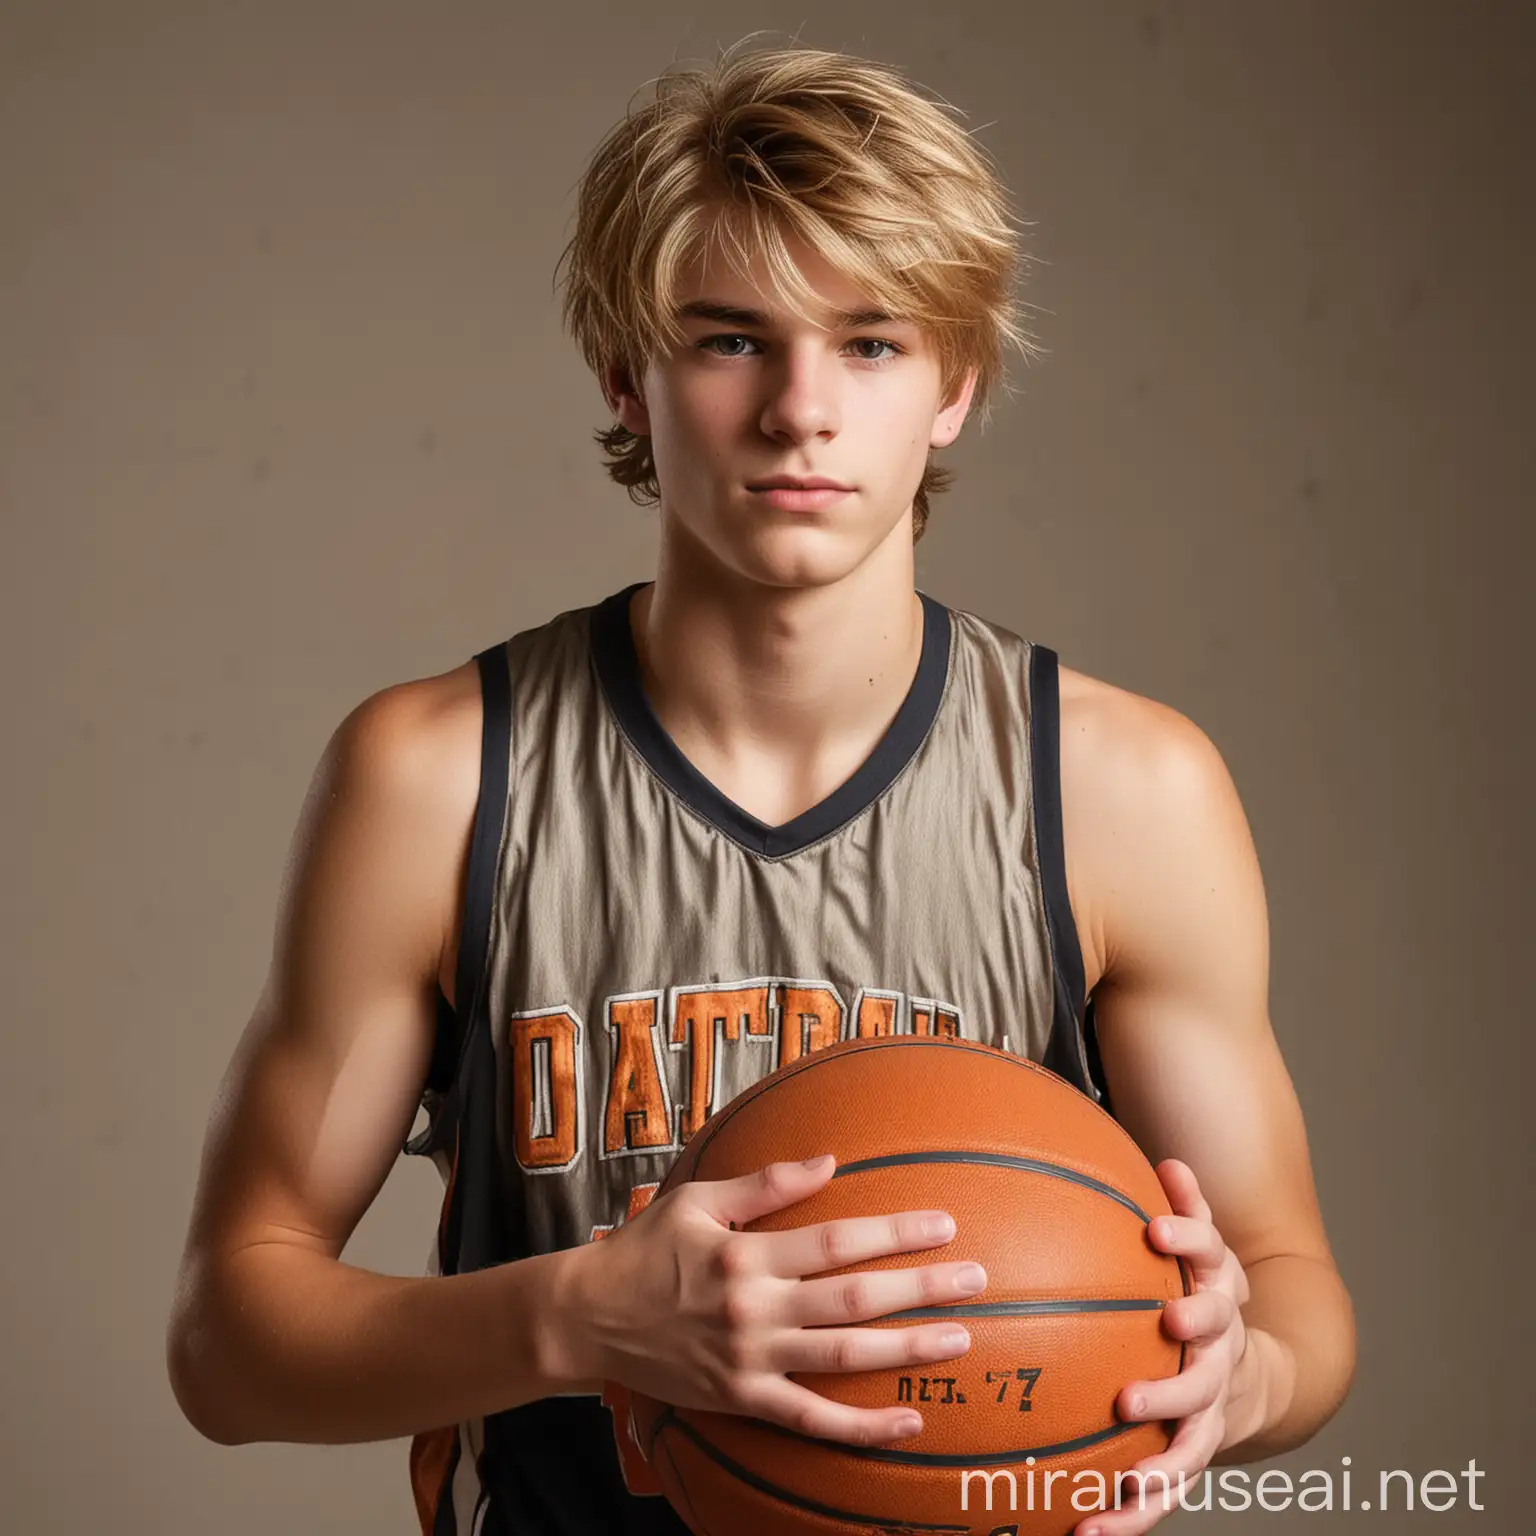 Athletic Teenage Basketball Player with Dirty Blond Hair